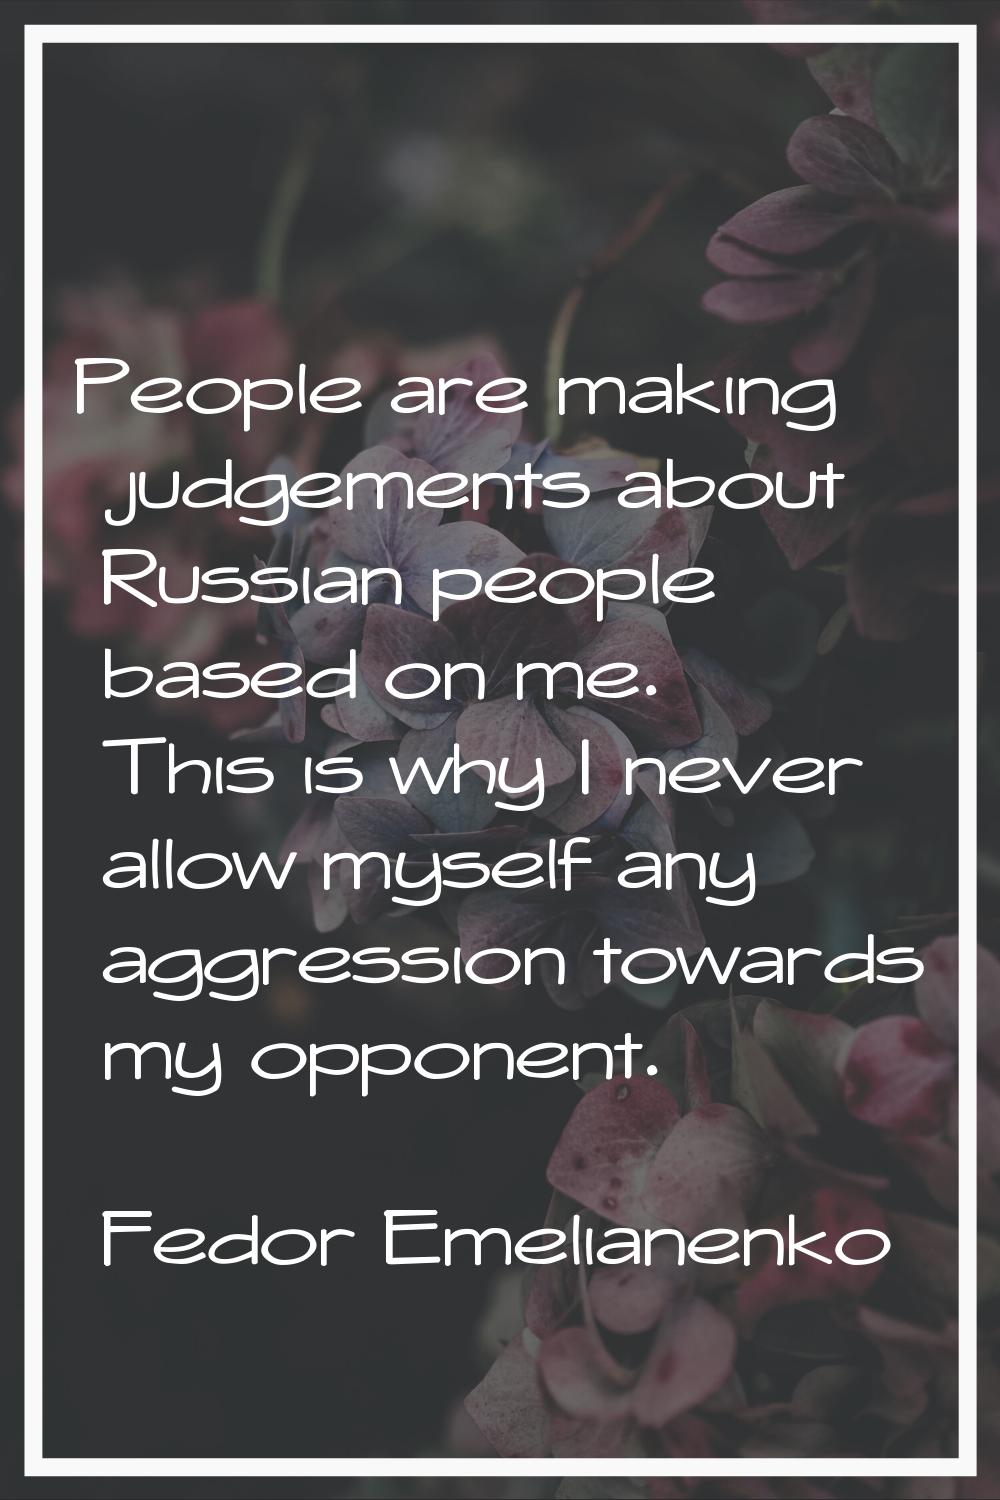 People are making judgements about Russian people based on me. This is why I never allow myself any